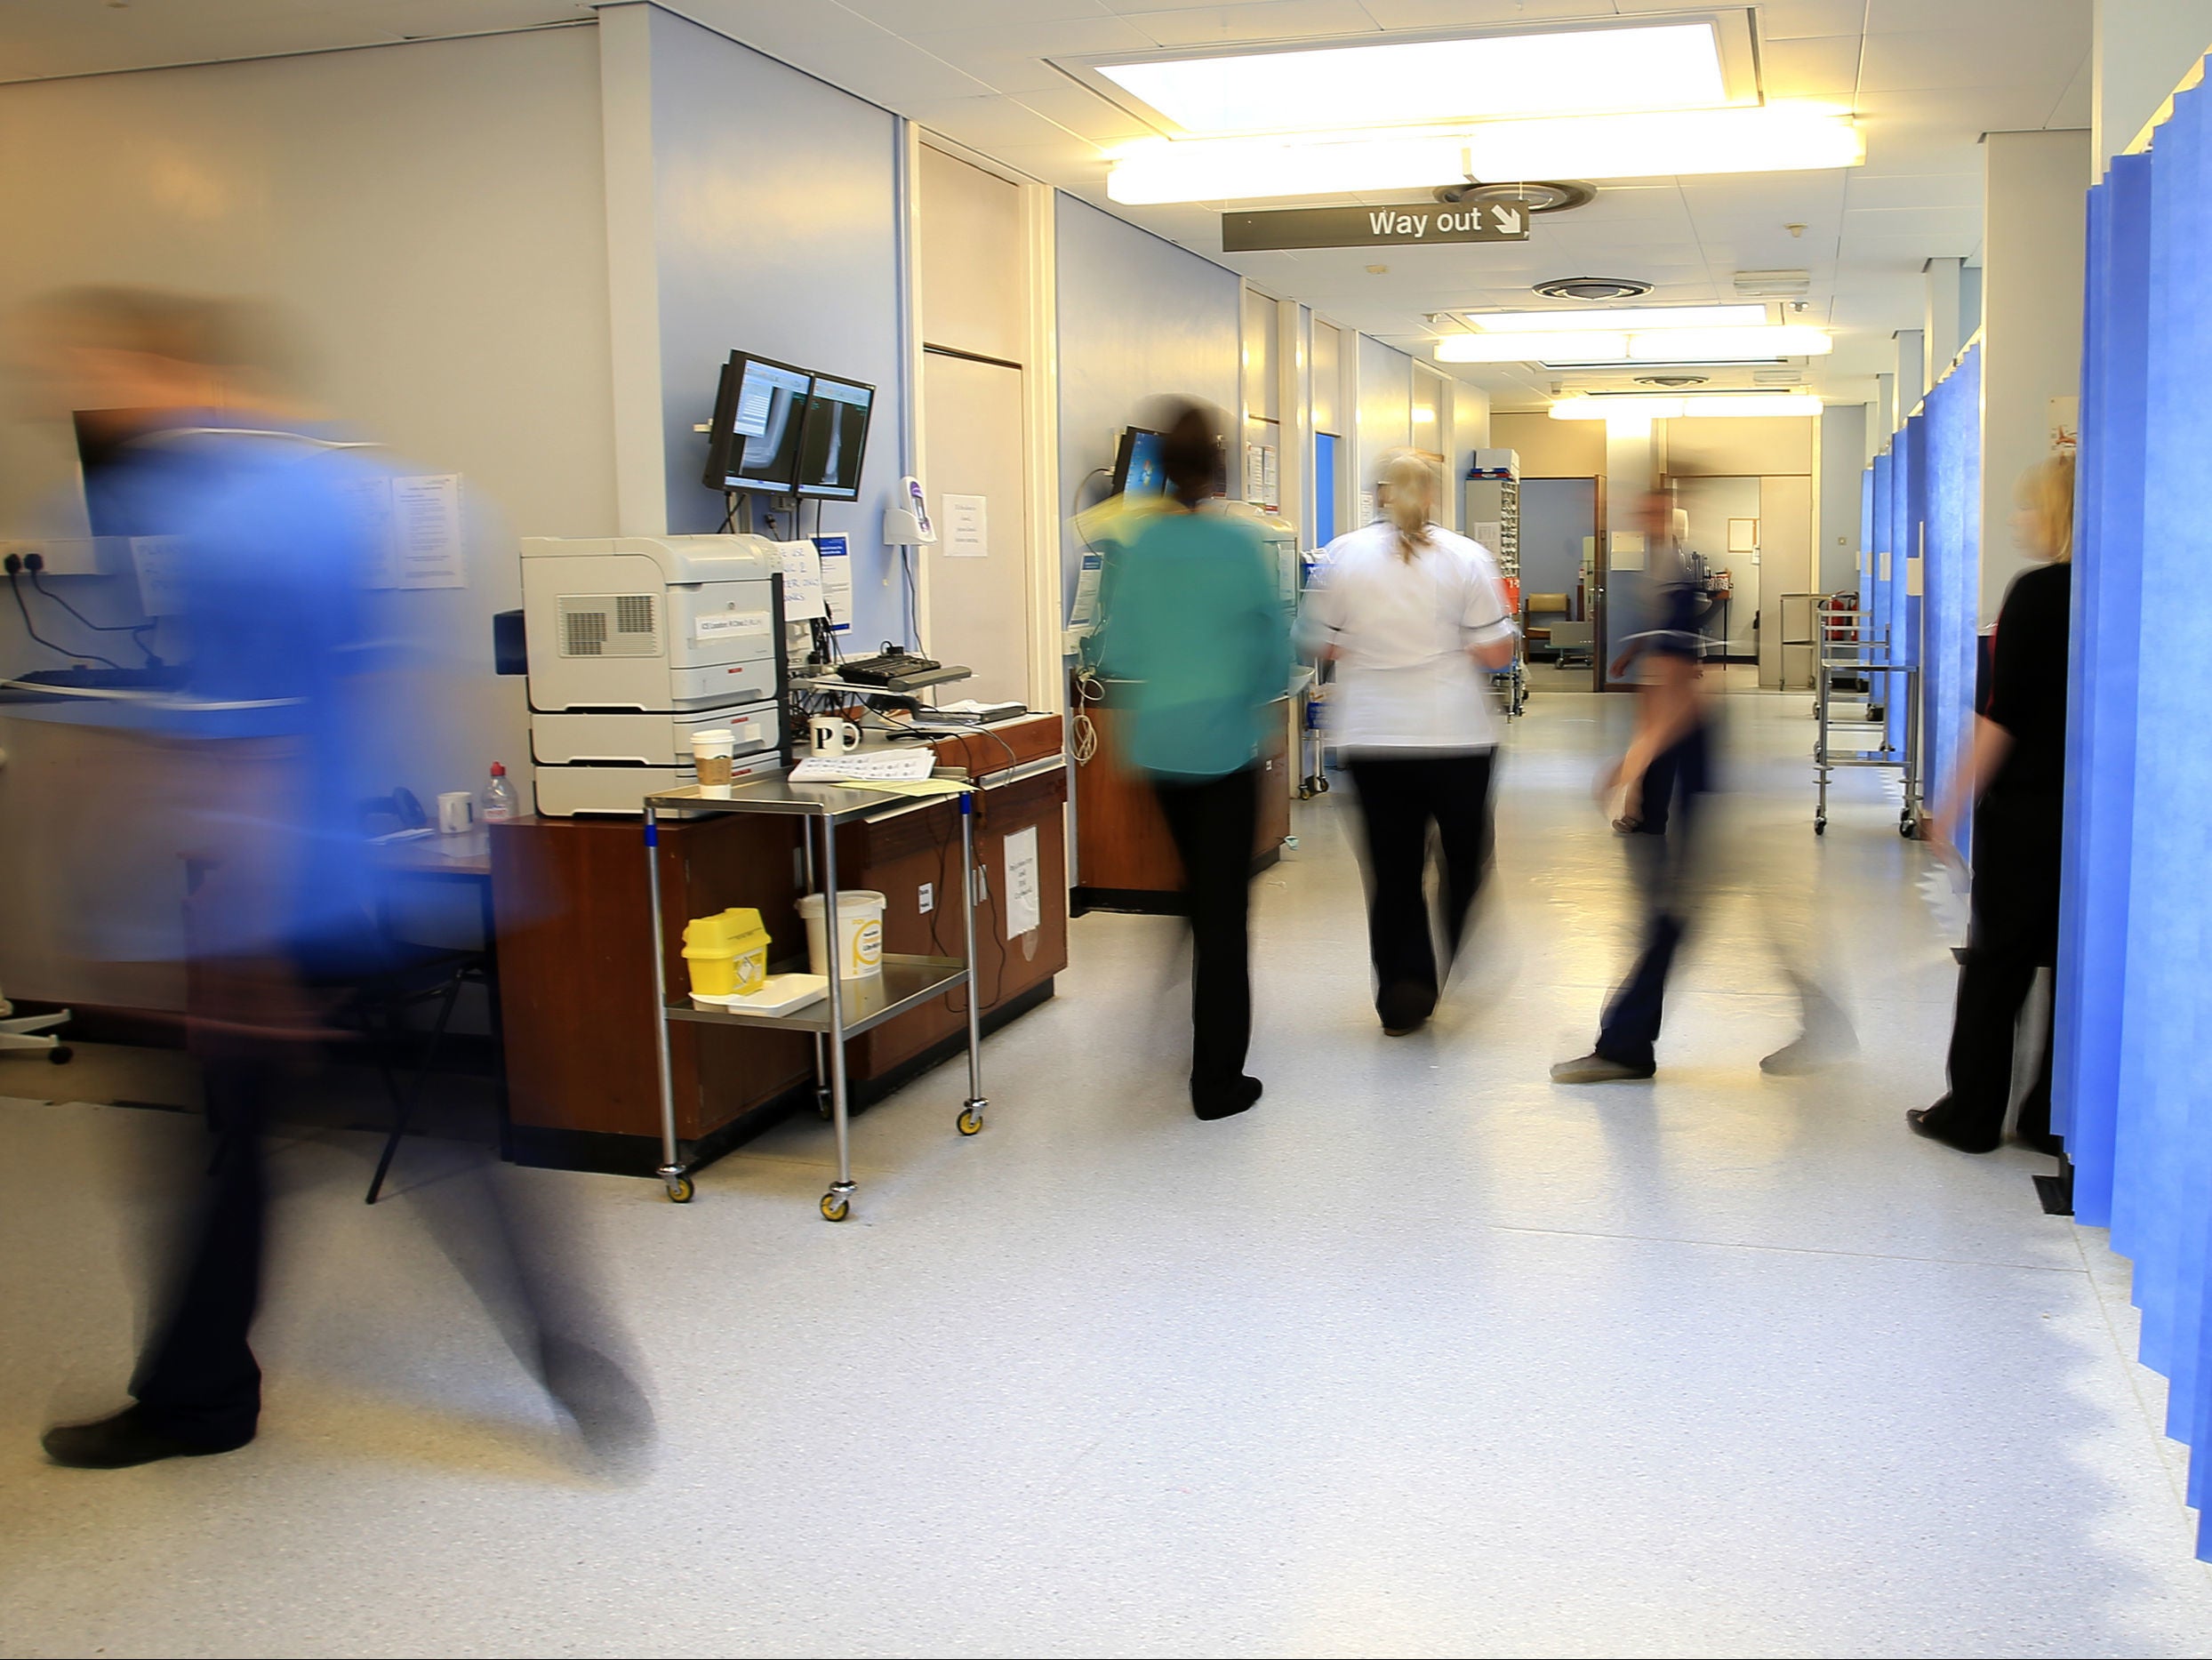 The NHS has yet to reveal its workforce projection for the NHS alongside its long term plan